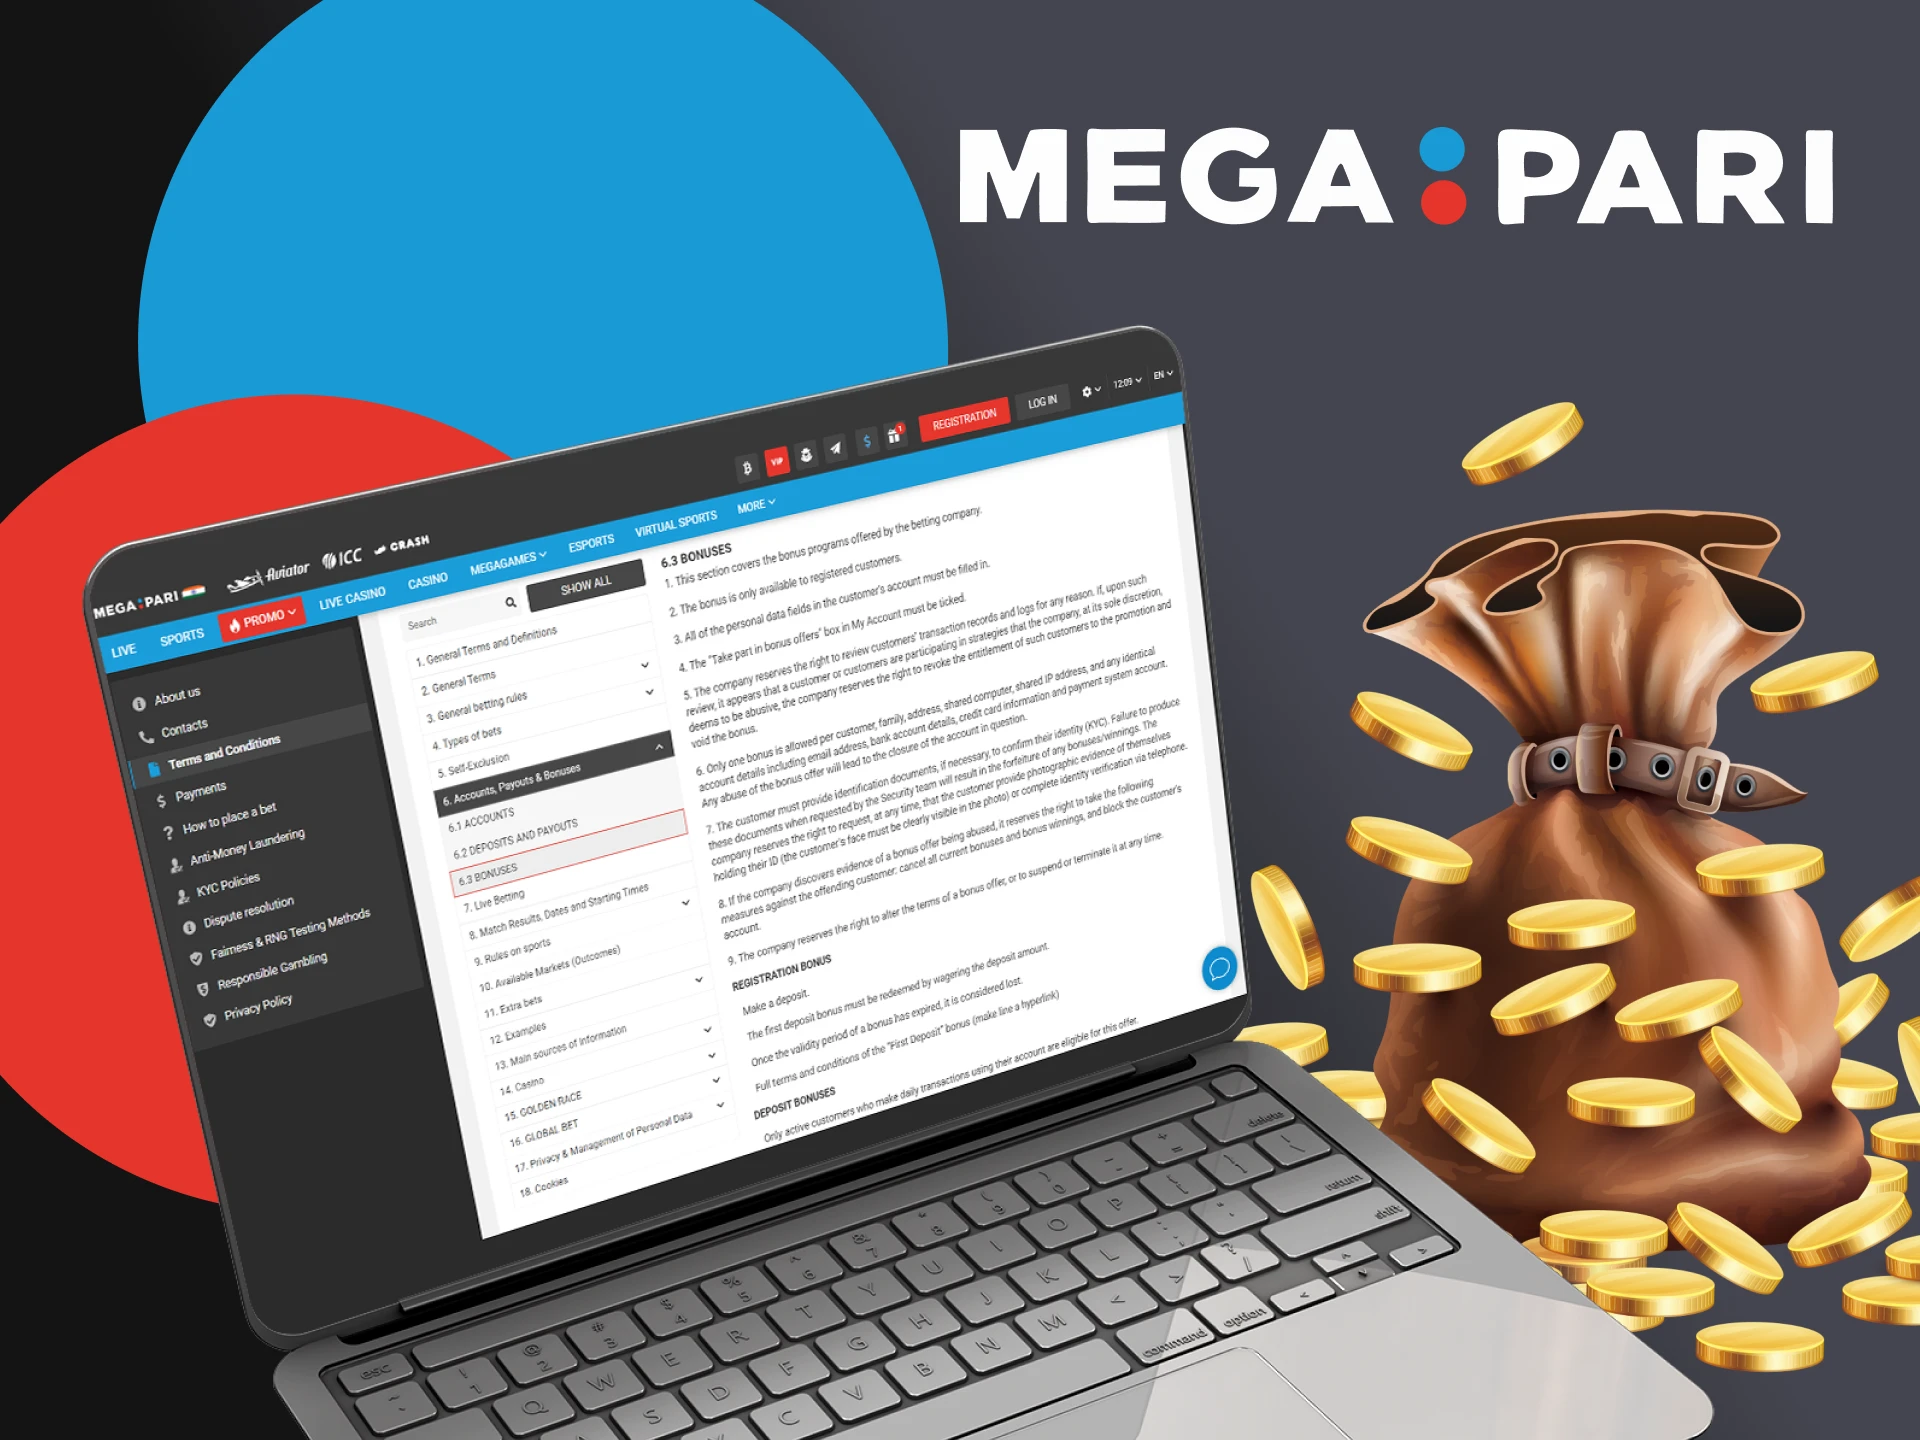 We will tell you about the rules for using a promotional code on Megapari.